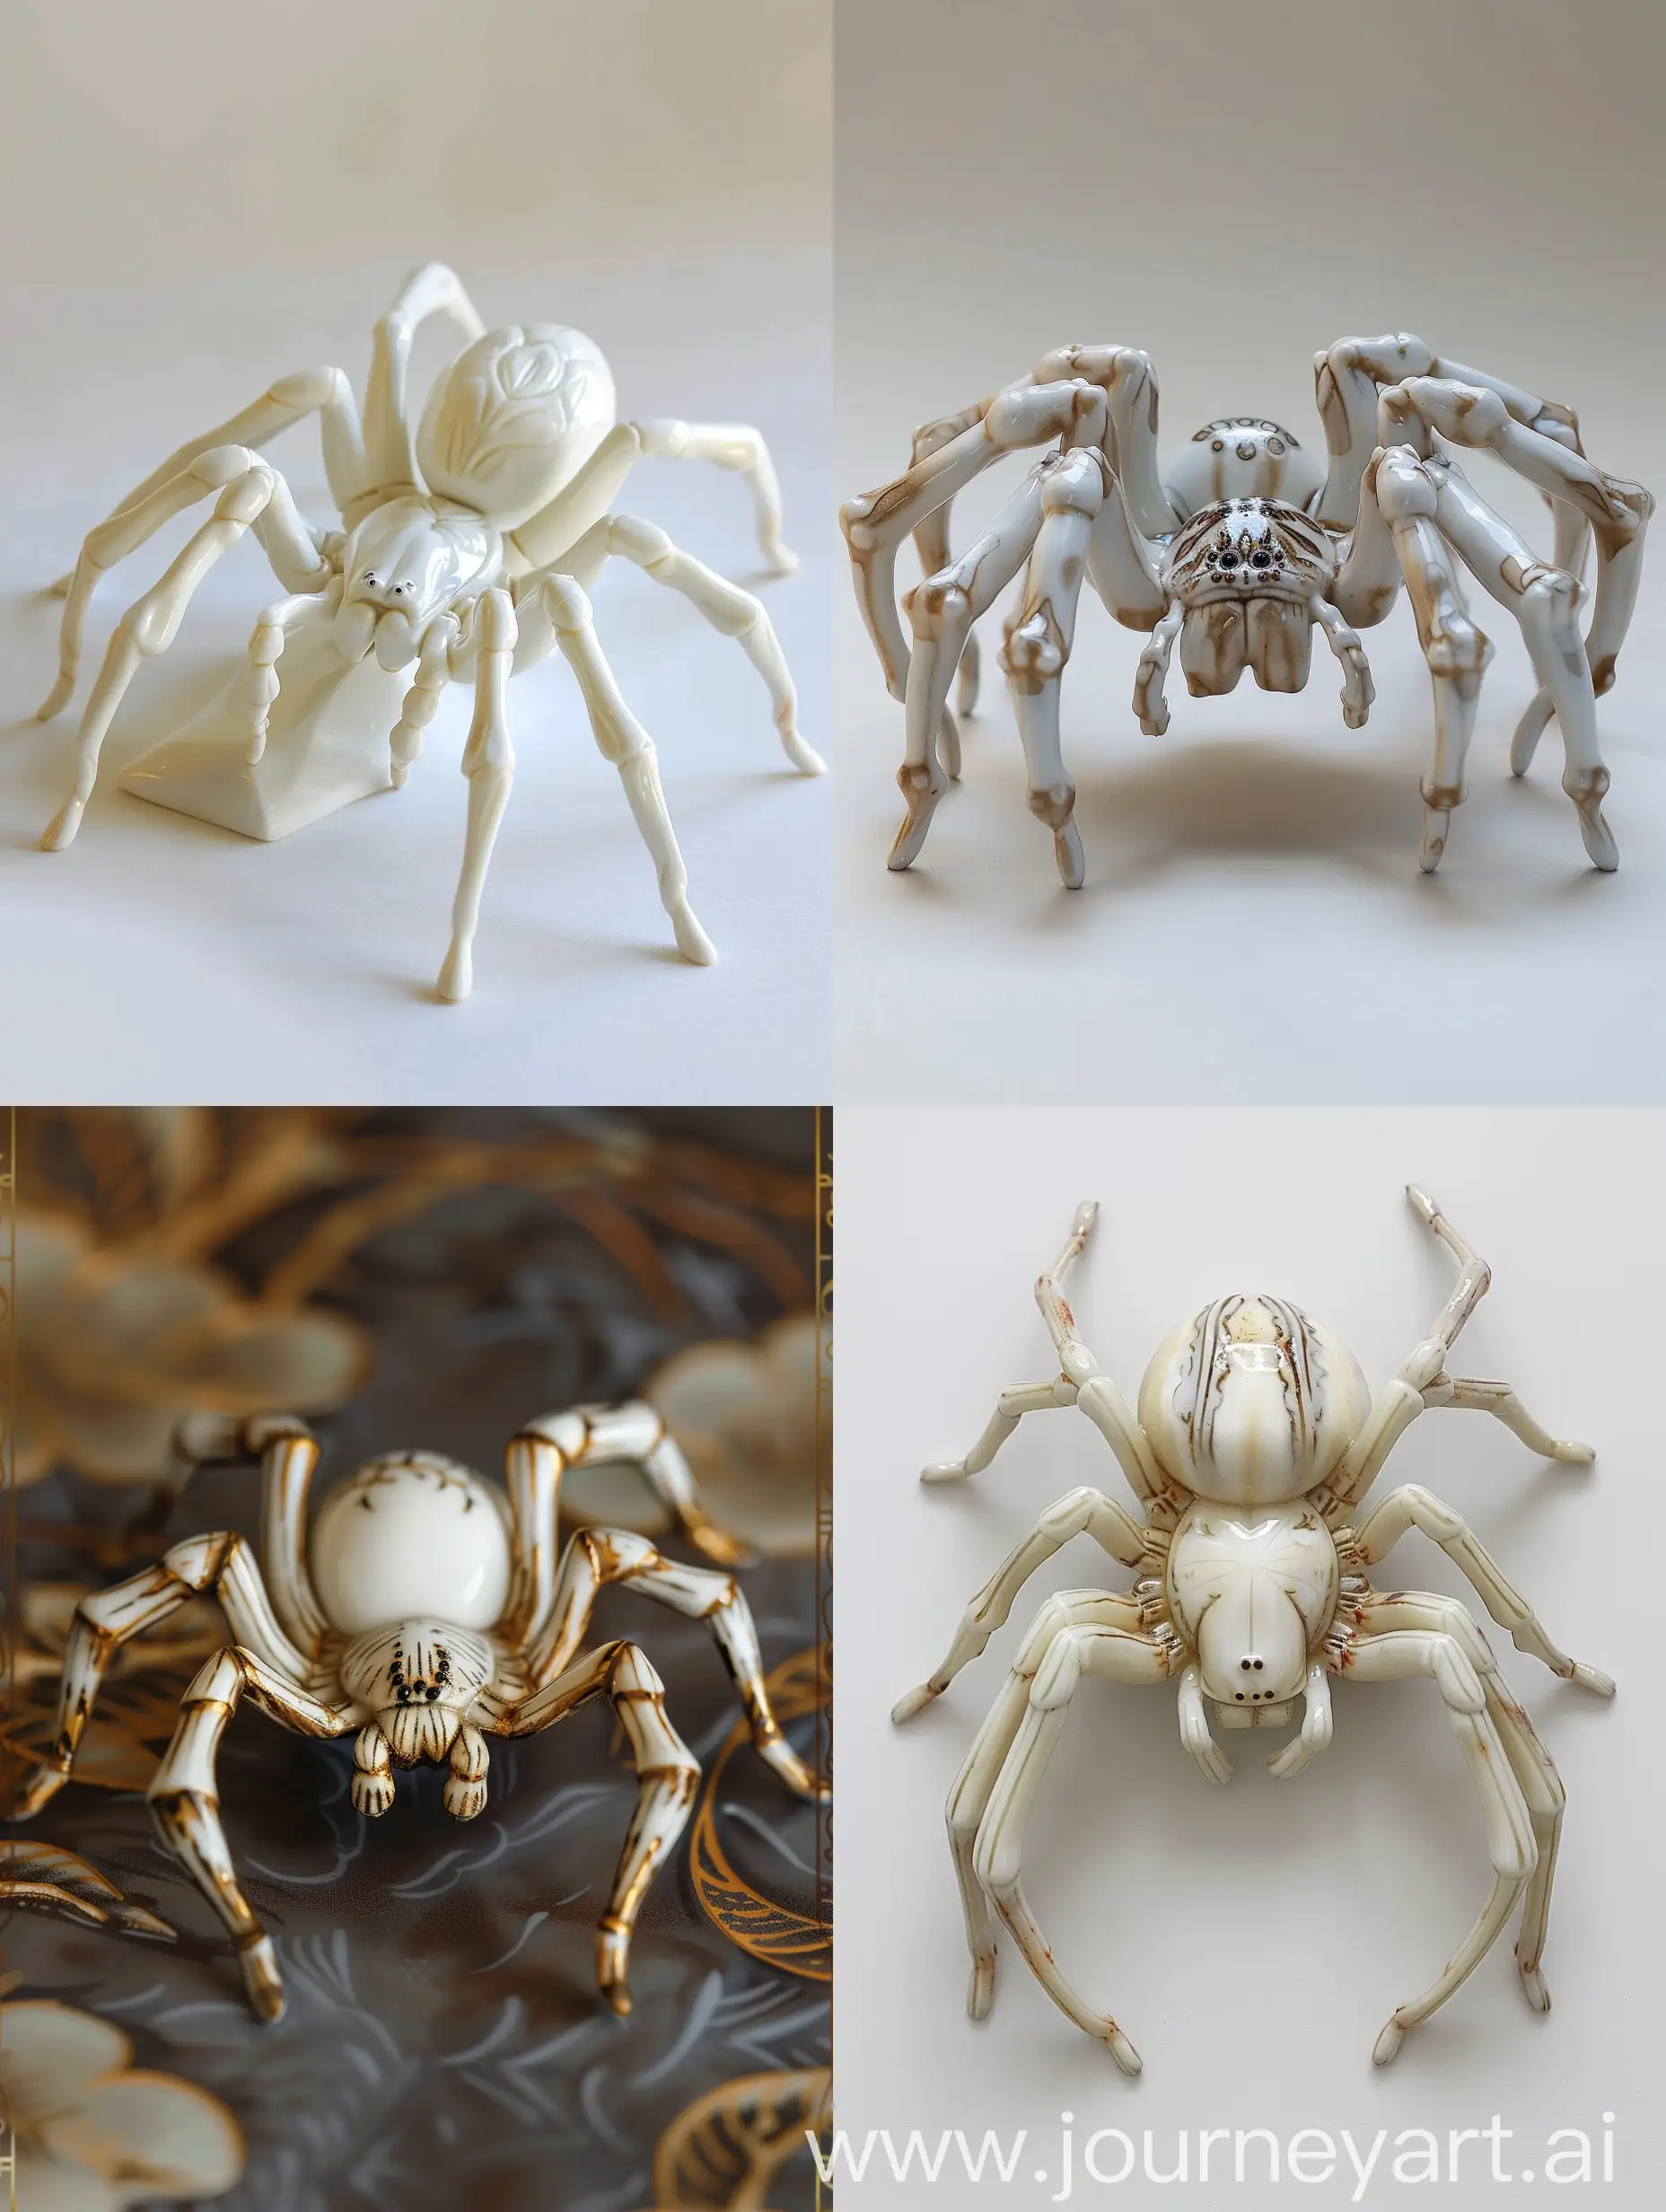 A traditional Japanese porcelain sculpture of a spider. It showcases the precision of porcelain craftsmanship. The intricate details of the spider demonstrate the elegance of Japanese art. This piece reflects the sophistication of Japanese porcelain-making, and stands as a representation of this age-old craft.